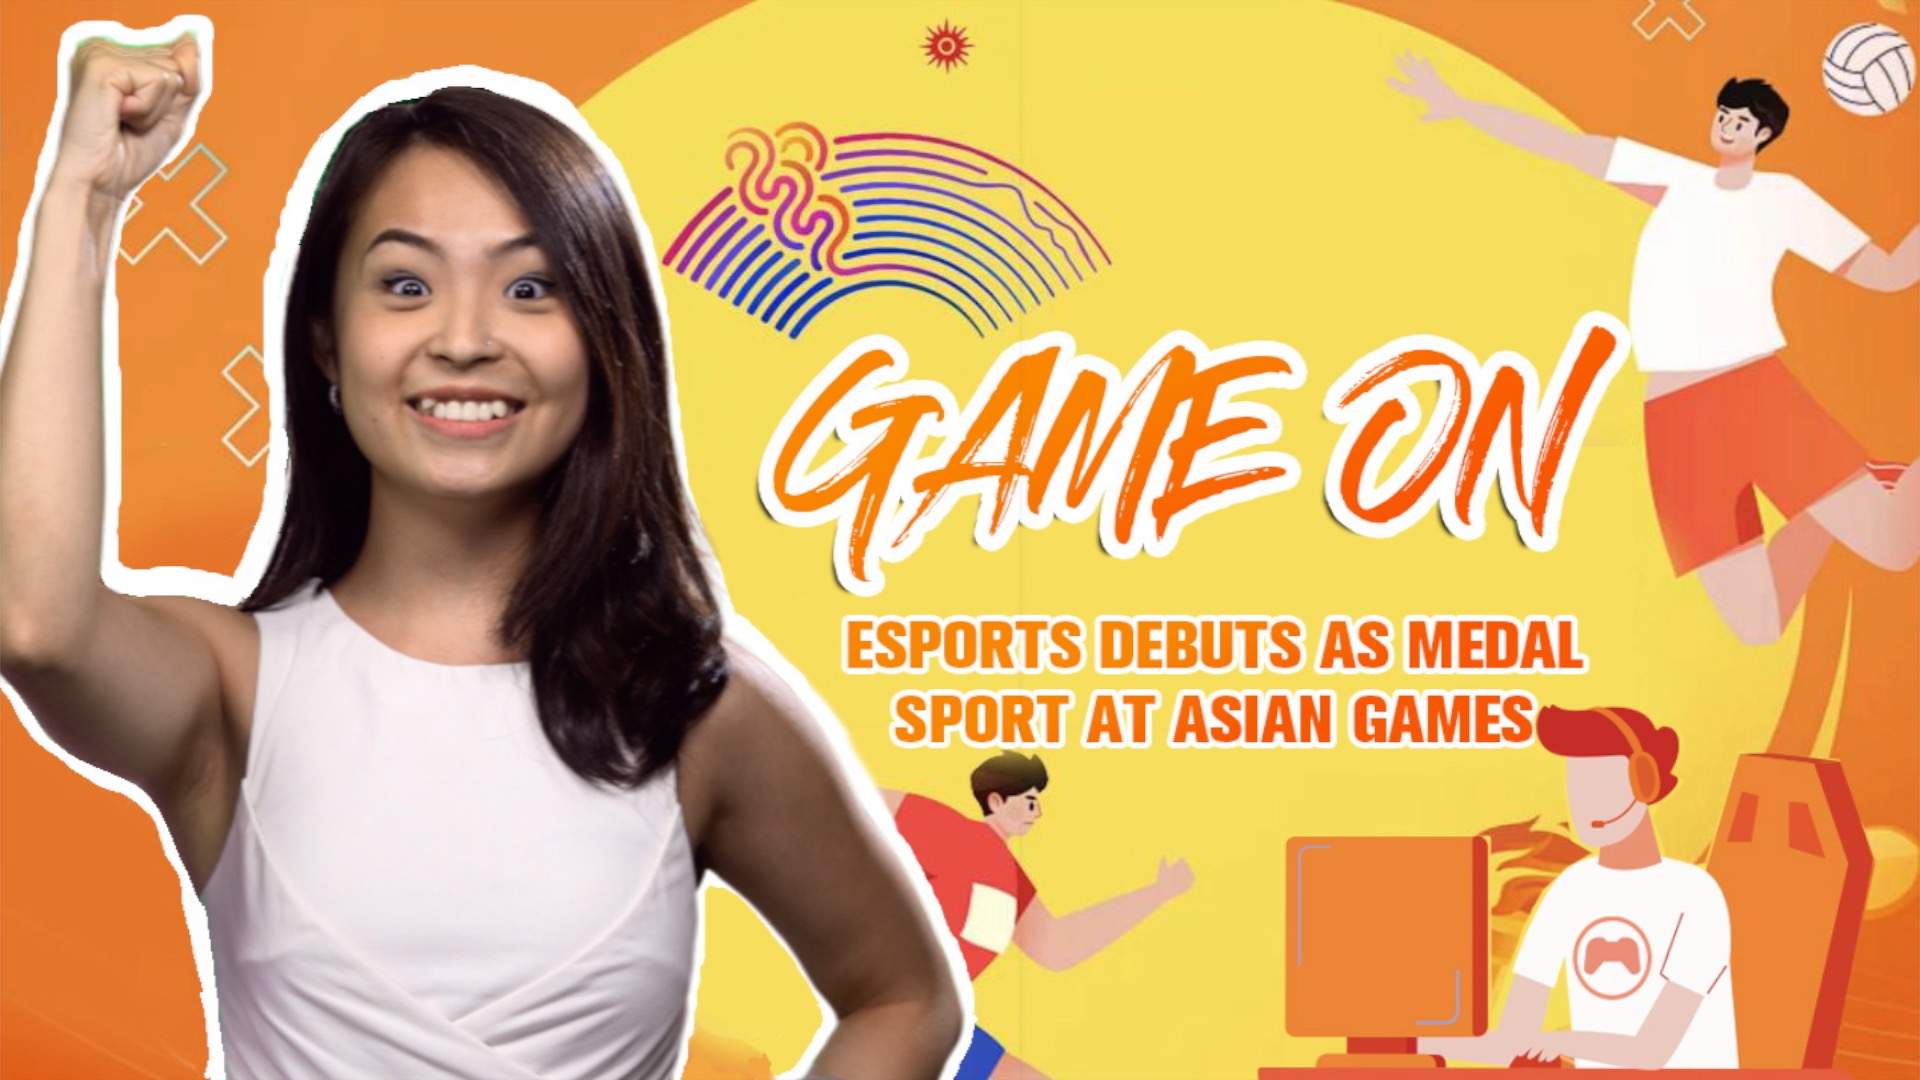 Game on: Esports debuts as medal sport at Hangzhou Asian Games